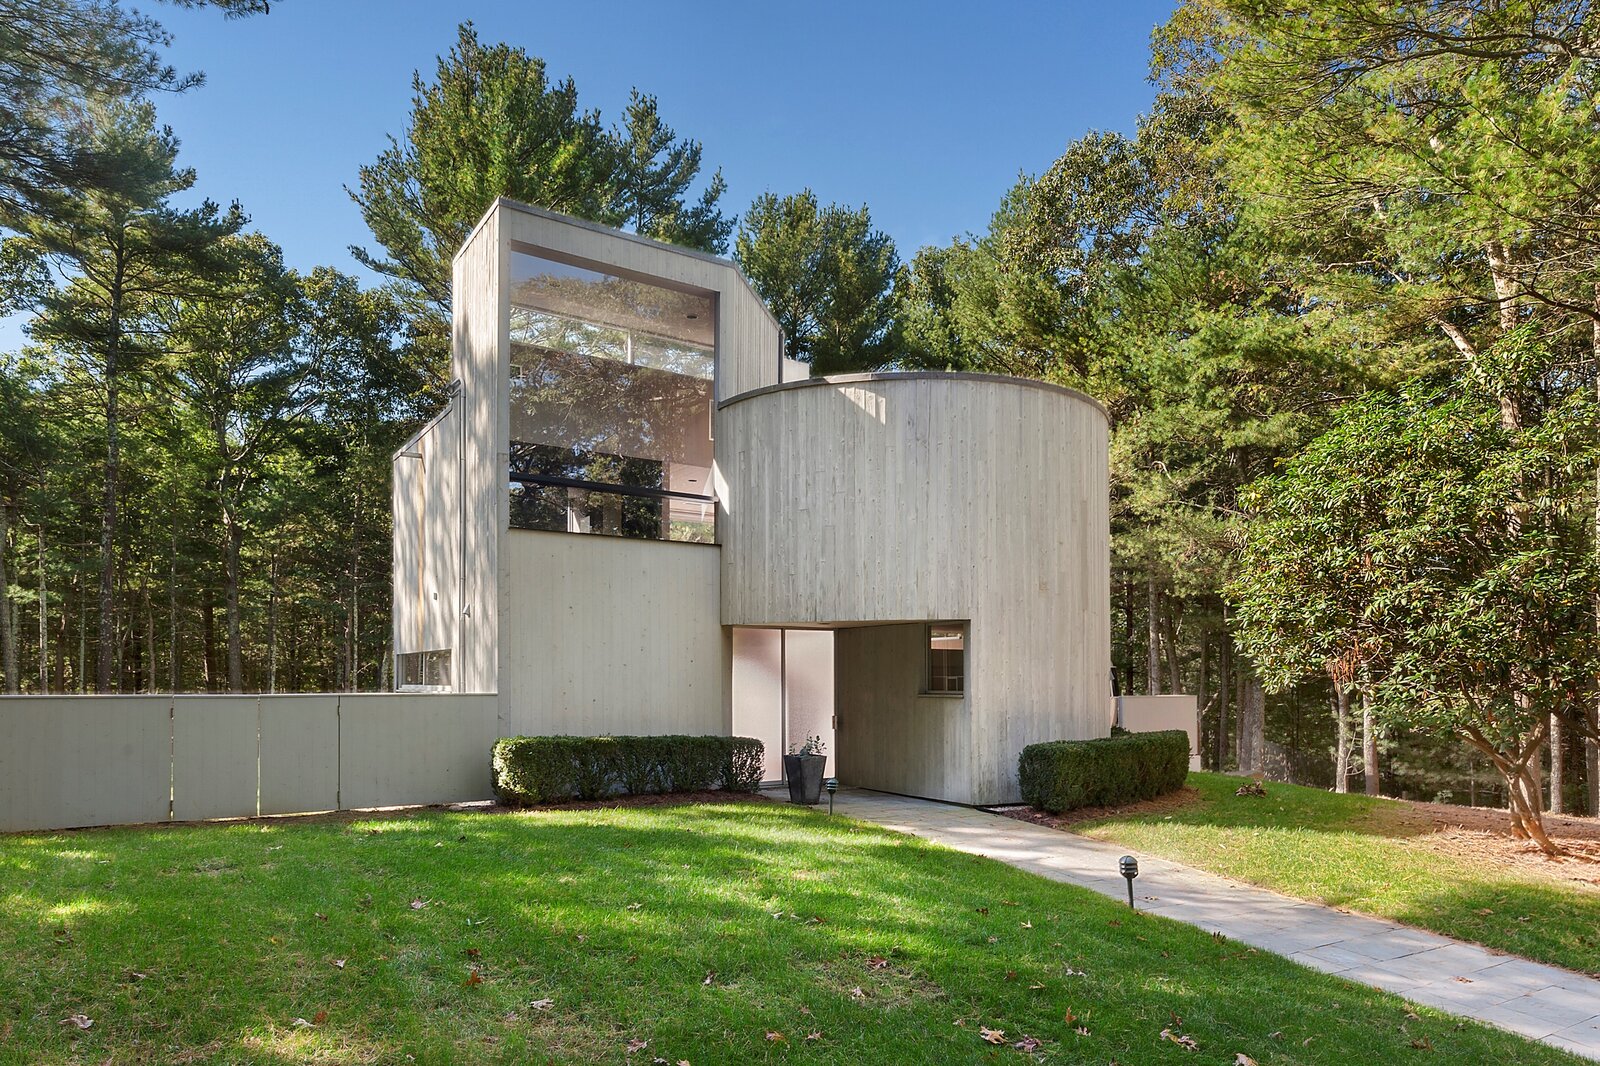 A Modernist Home by Charles Gwathmey in the Hamptons